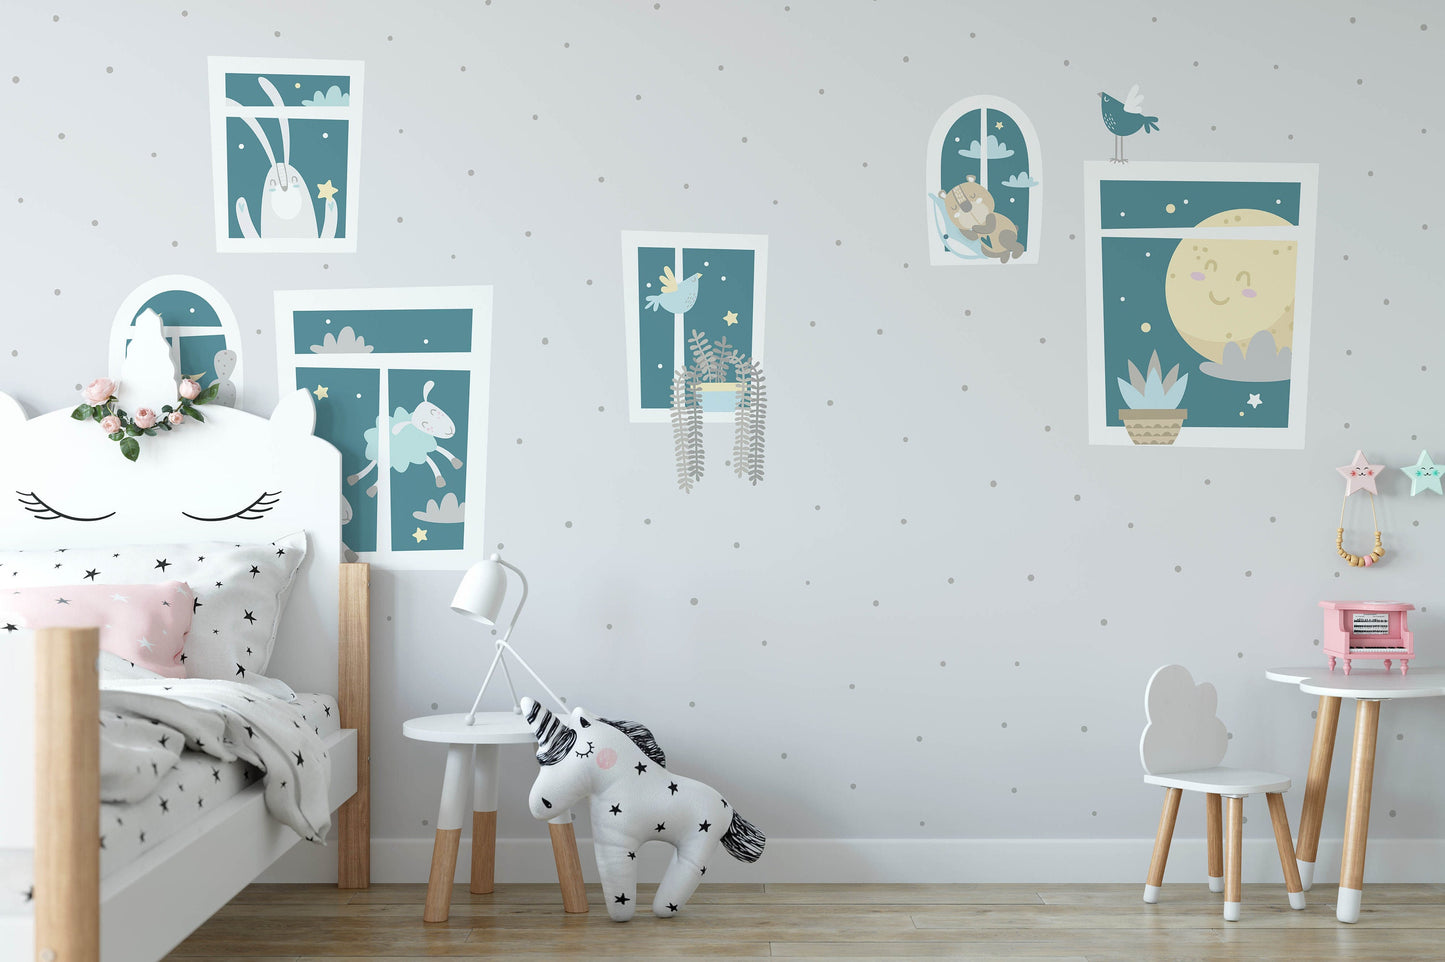 Removable Peel and Stick Wallpaper Windows Night Sky  Nursery Wall Paper Wall Murals, KL0053